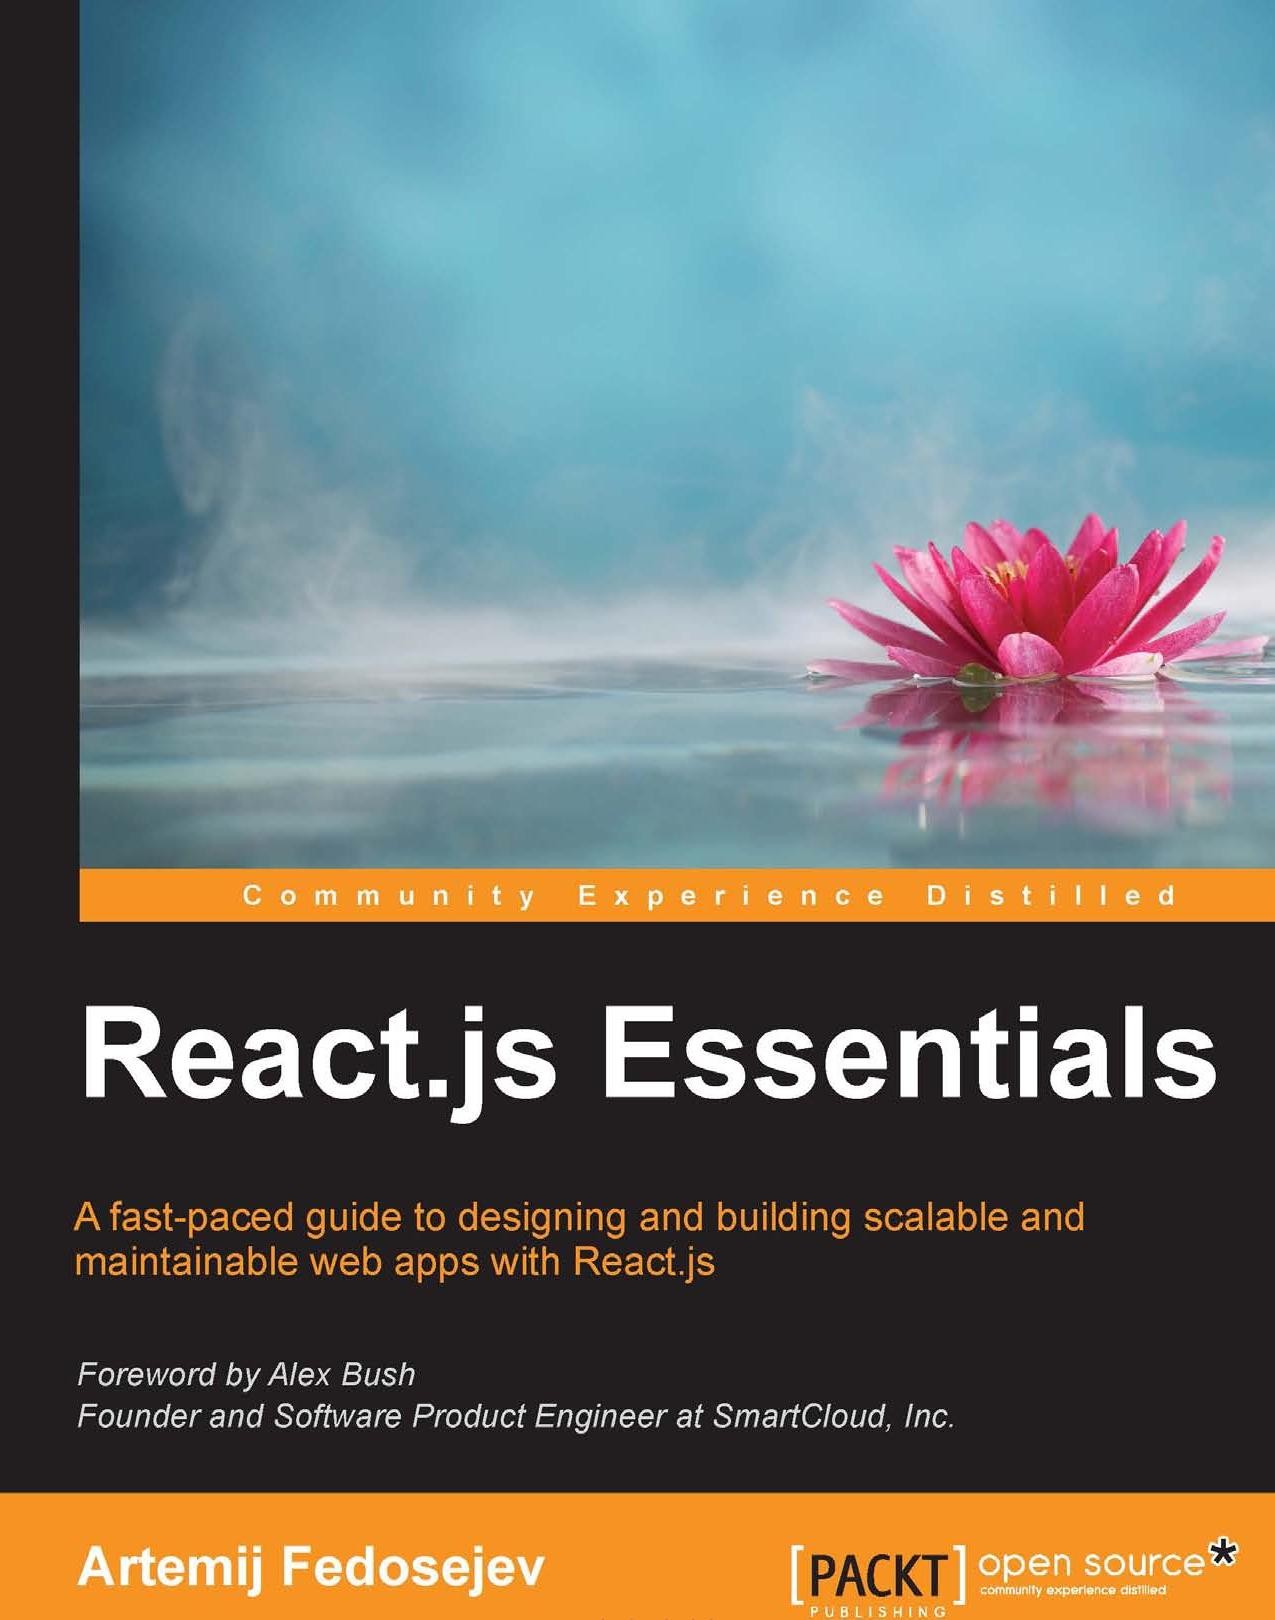 React.js Essentials: A Fast-Paced Guide to Designing and Building Scalable and Maintainable Web Apps With React.js